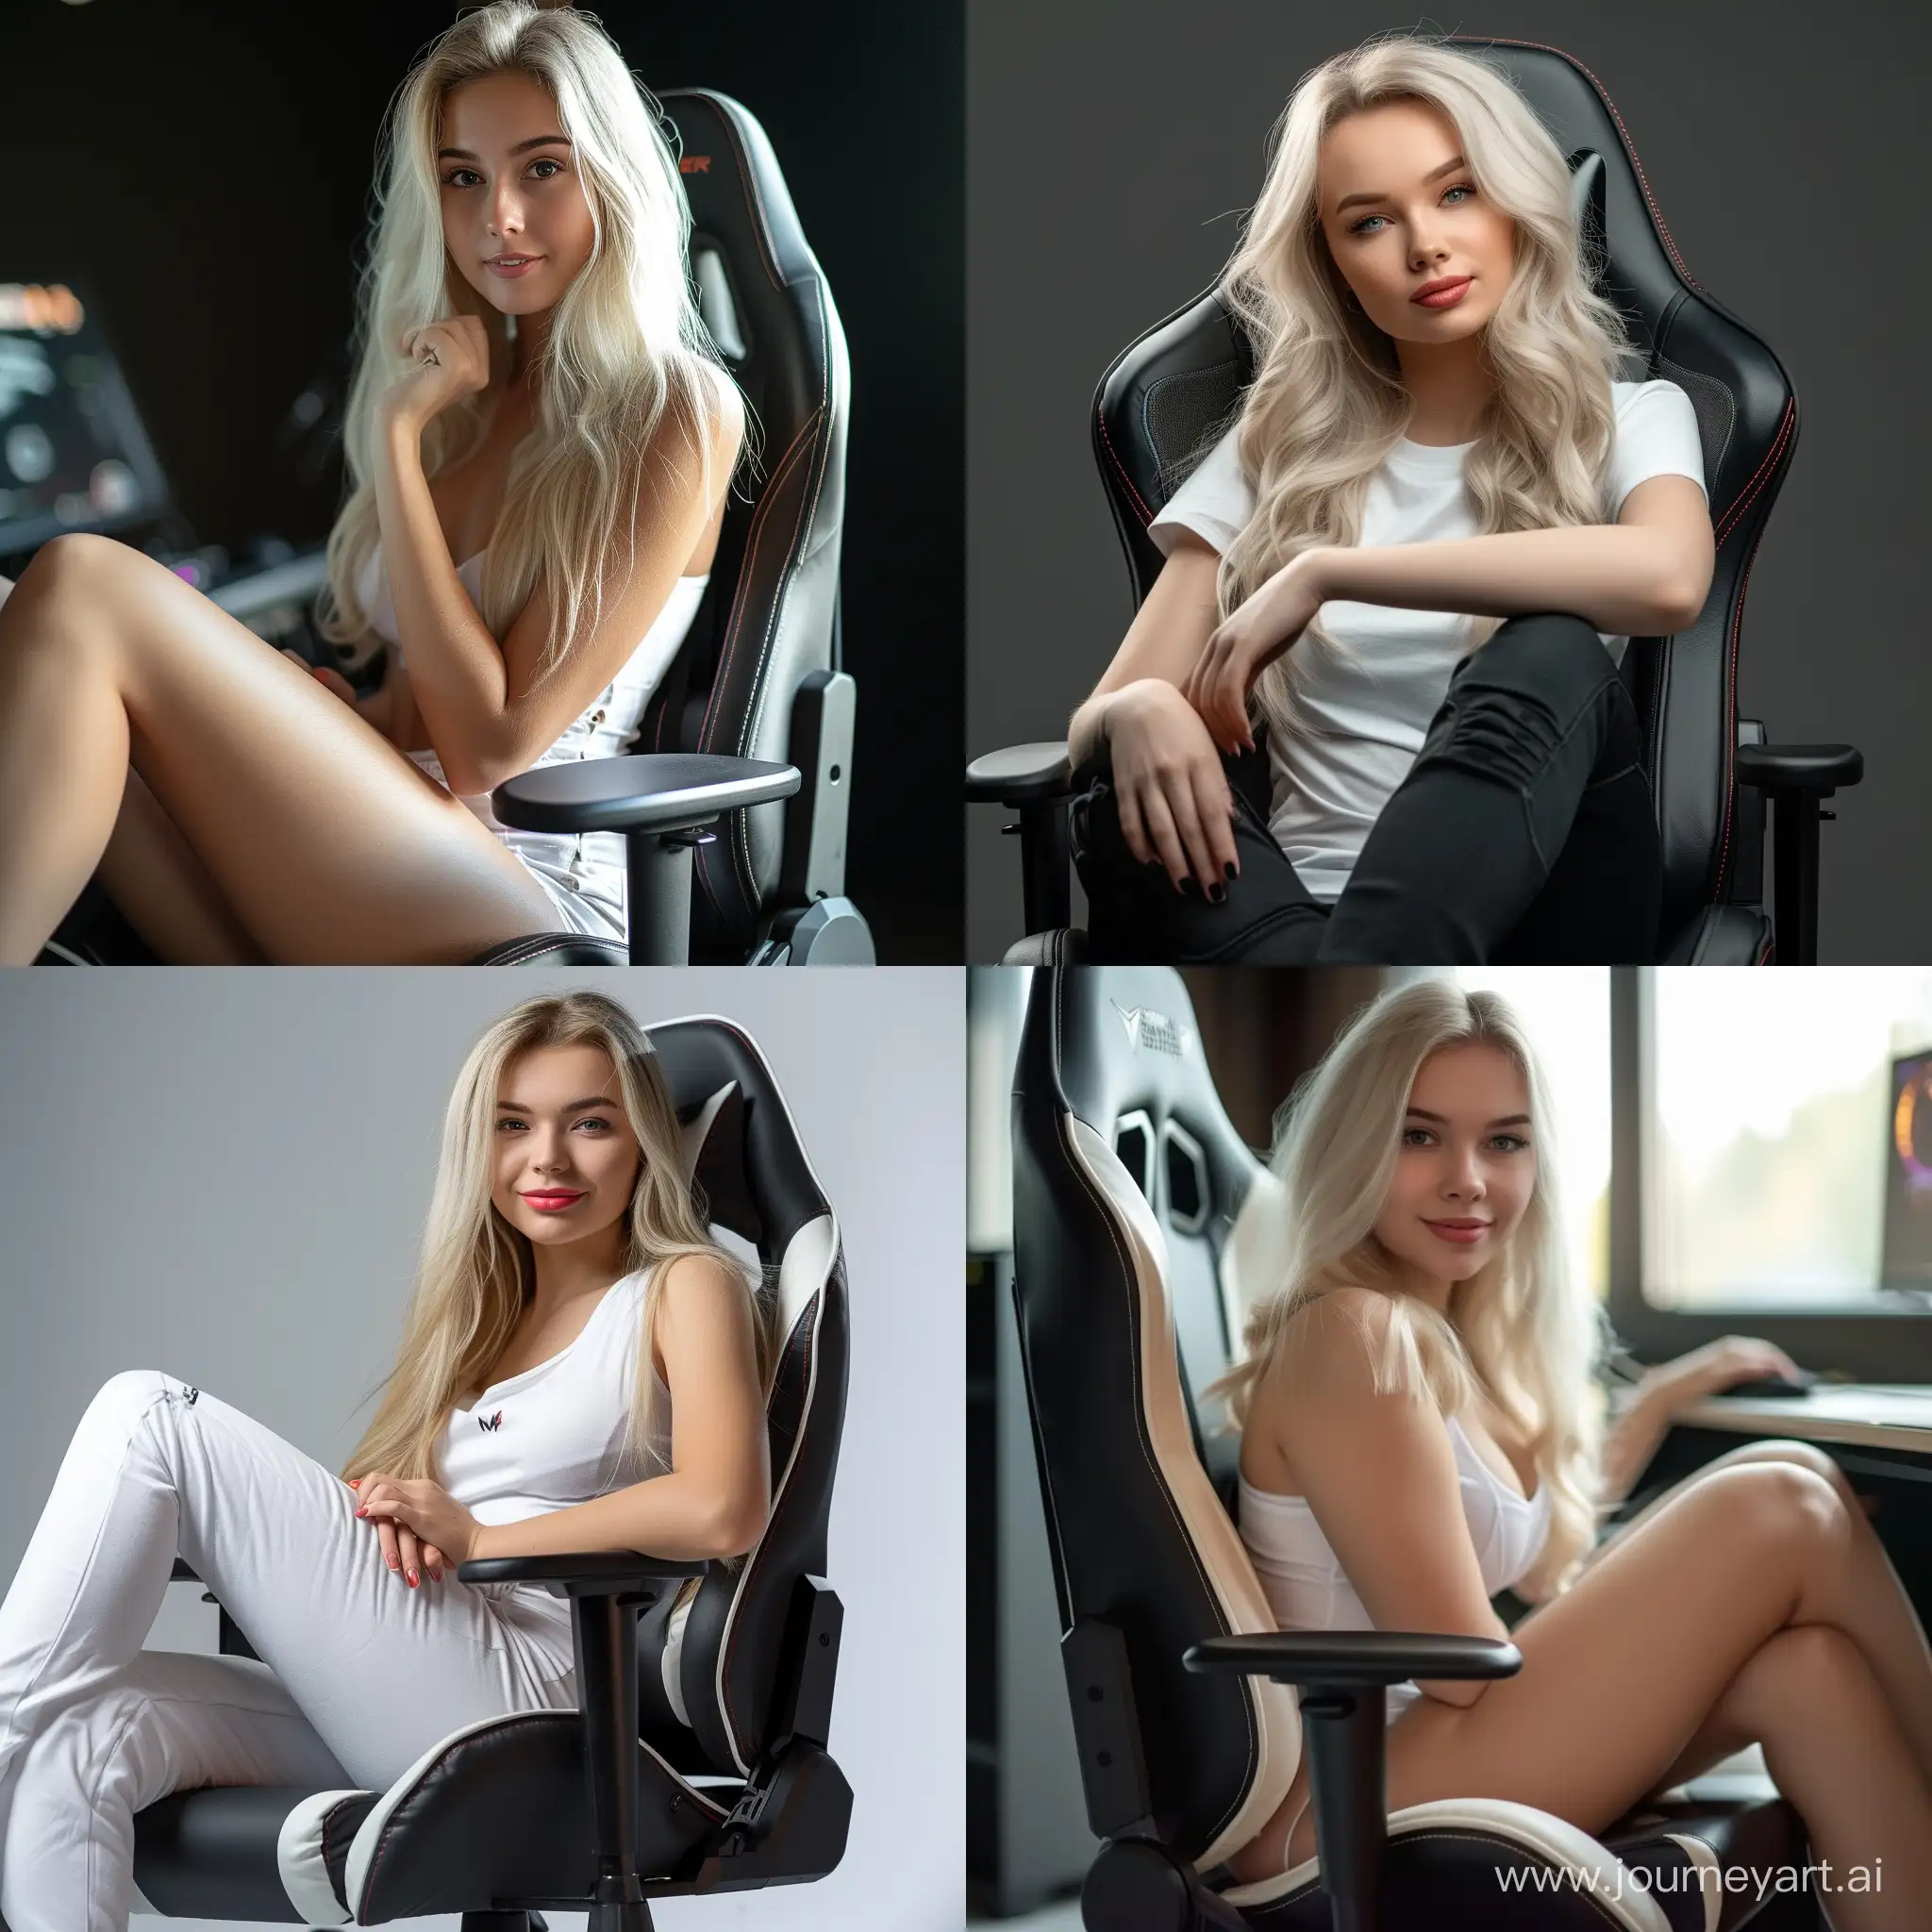 white young blonde beautiful woman sitting on a gaming chair